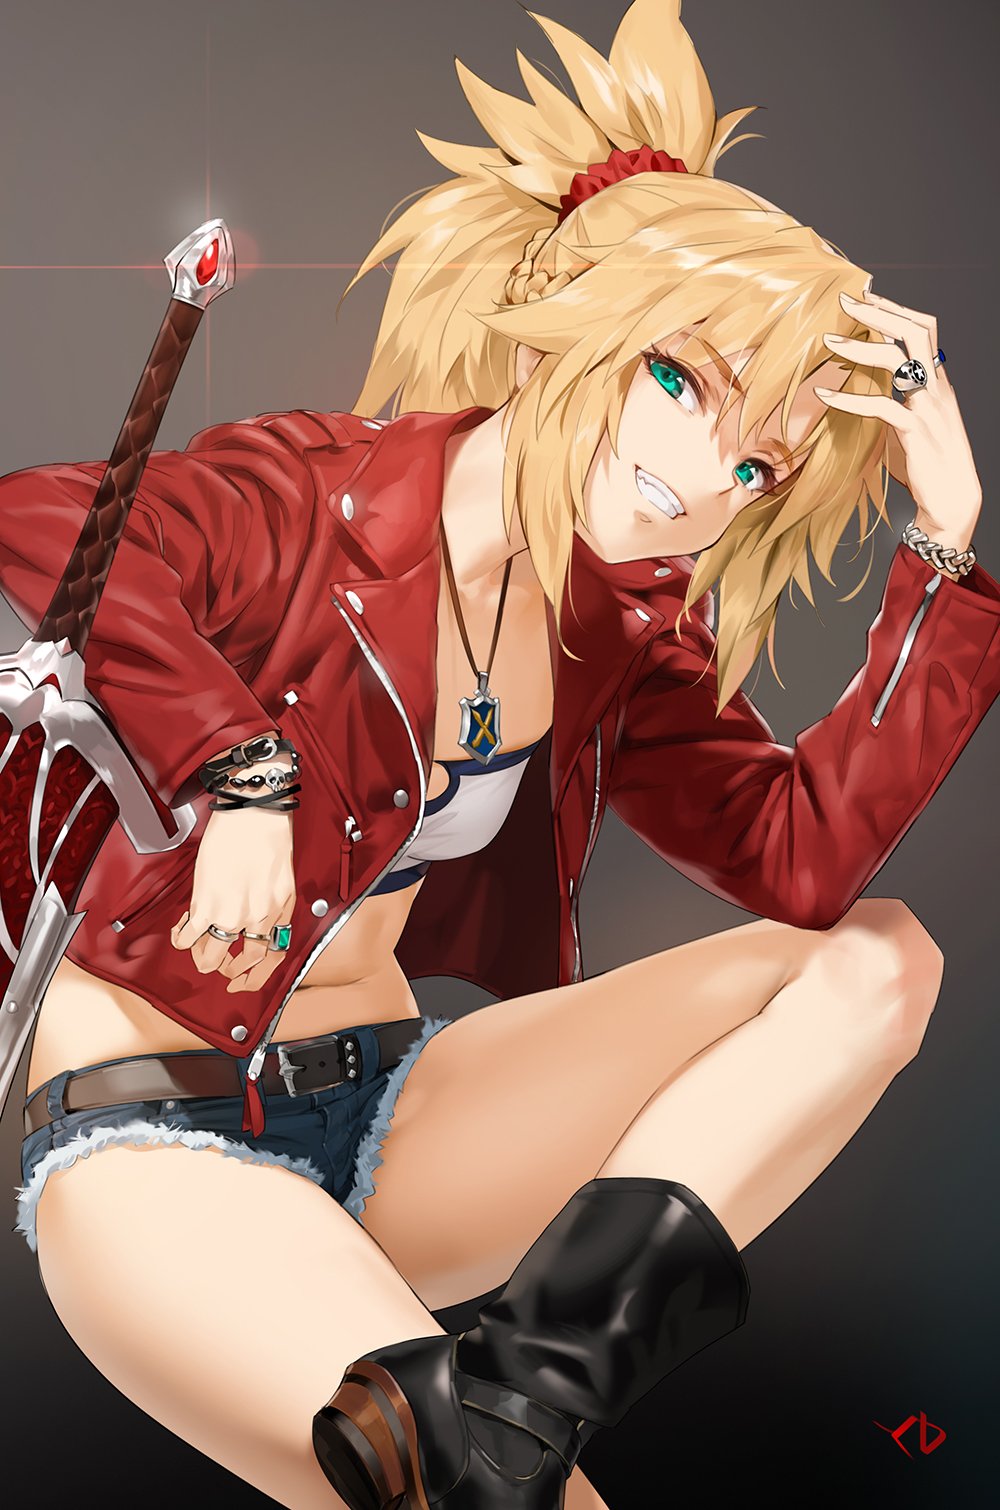 Fate Series Fate Apocrypha Anime Girls Blonde Fantasy Weapon Saber Of Red Mordred Fate Apocrypha 1000x1510